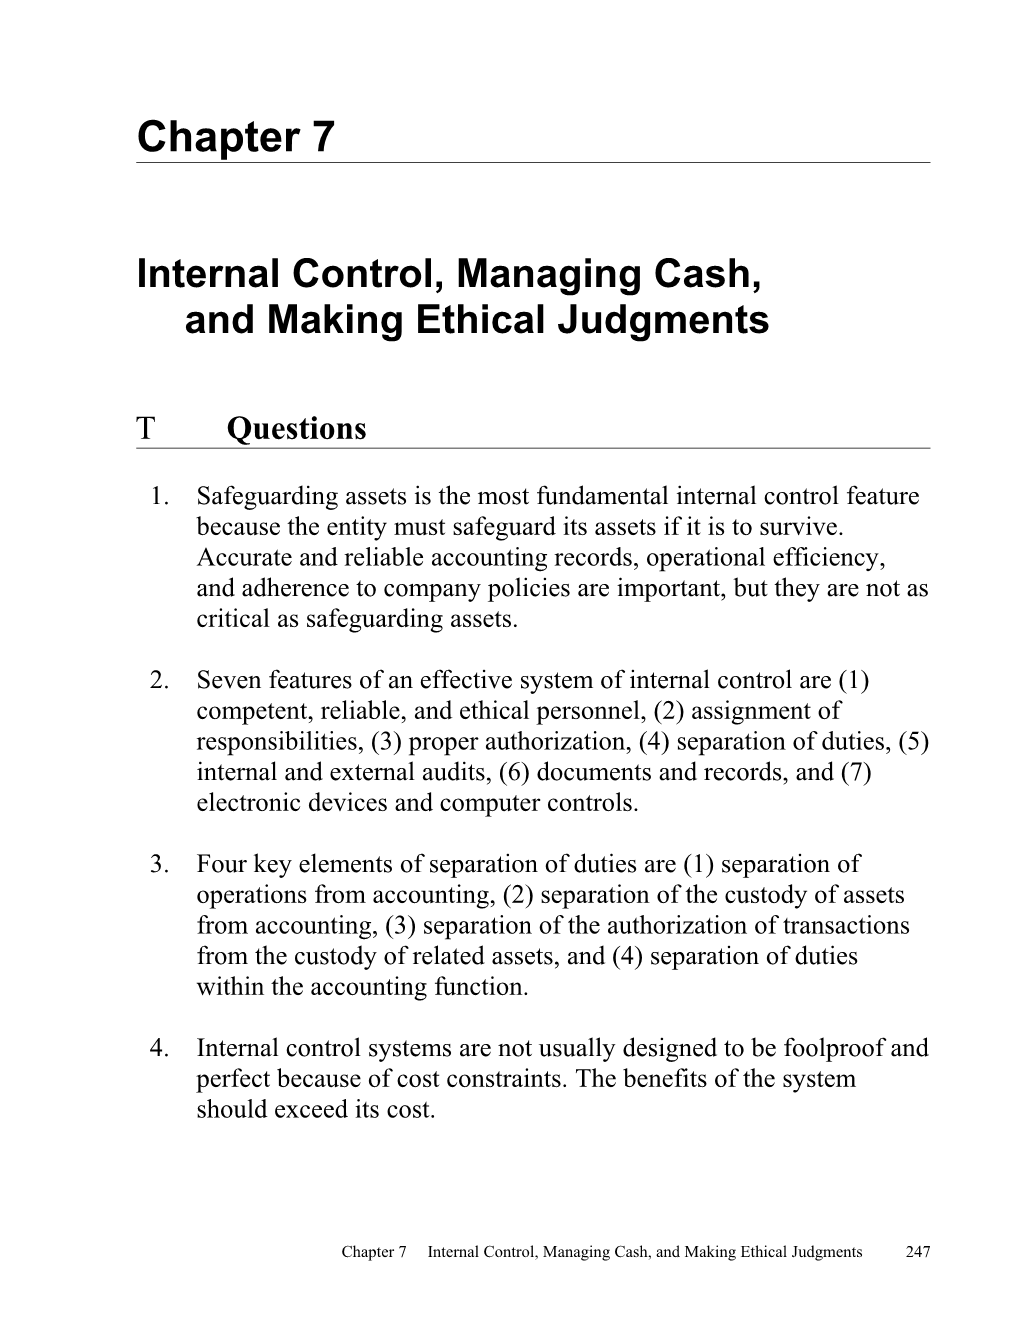 Internal Control, Managing Cash, and Making Ethical Judgments